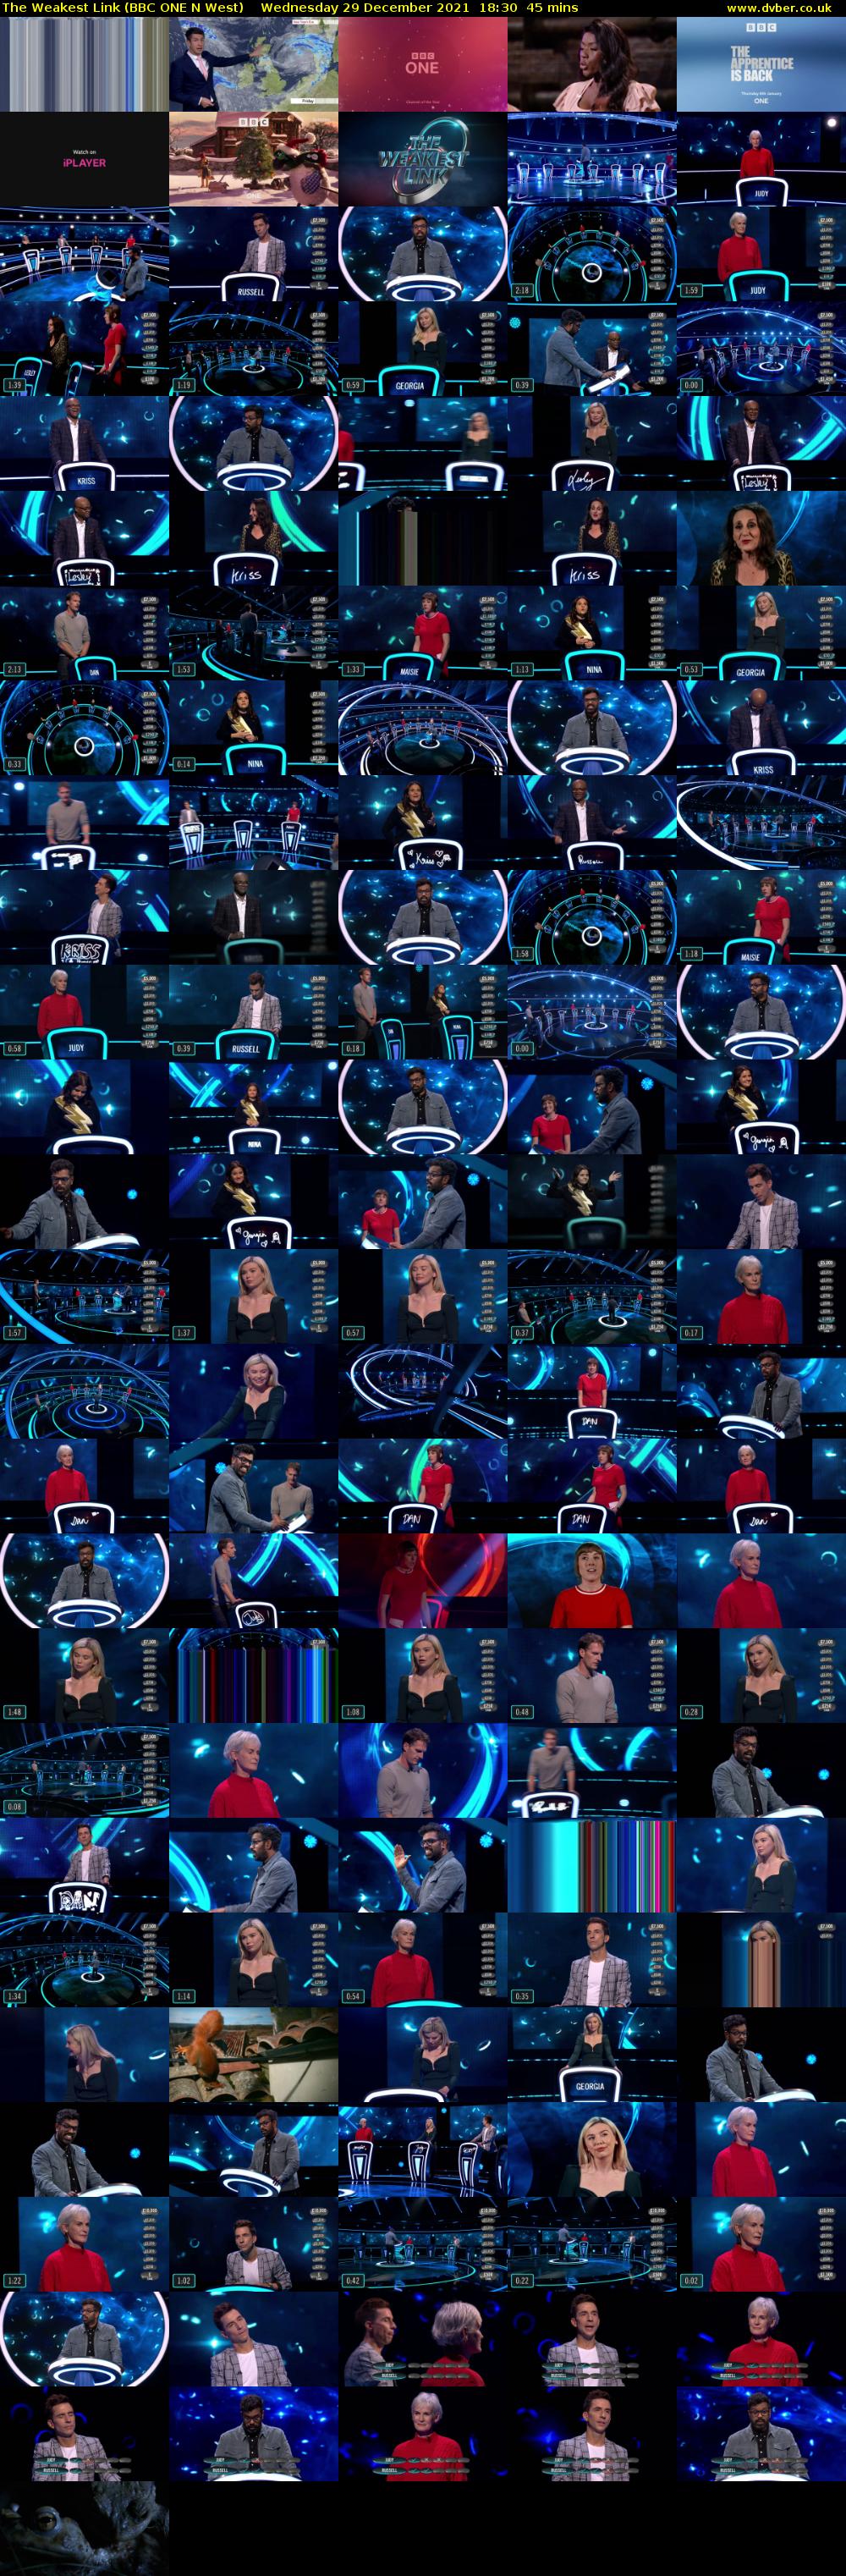 The Weakest Link (BBC ONE N West) Wednesday 29 December 2021 18:30 - 19:15